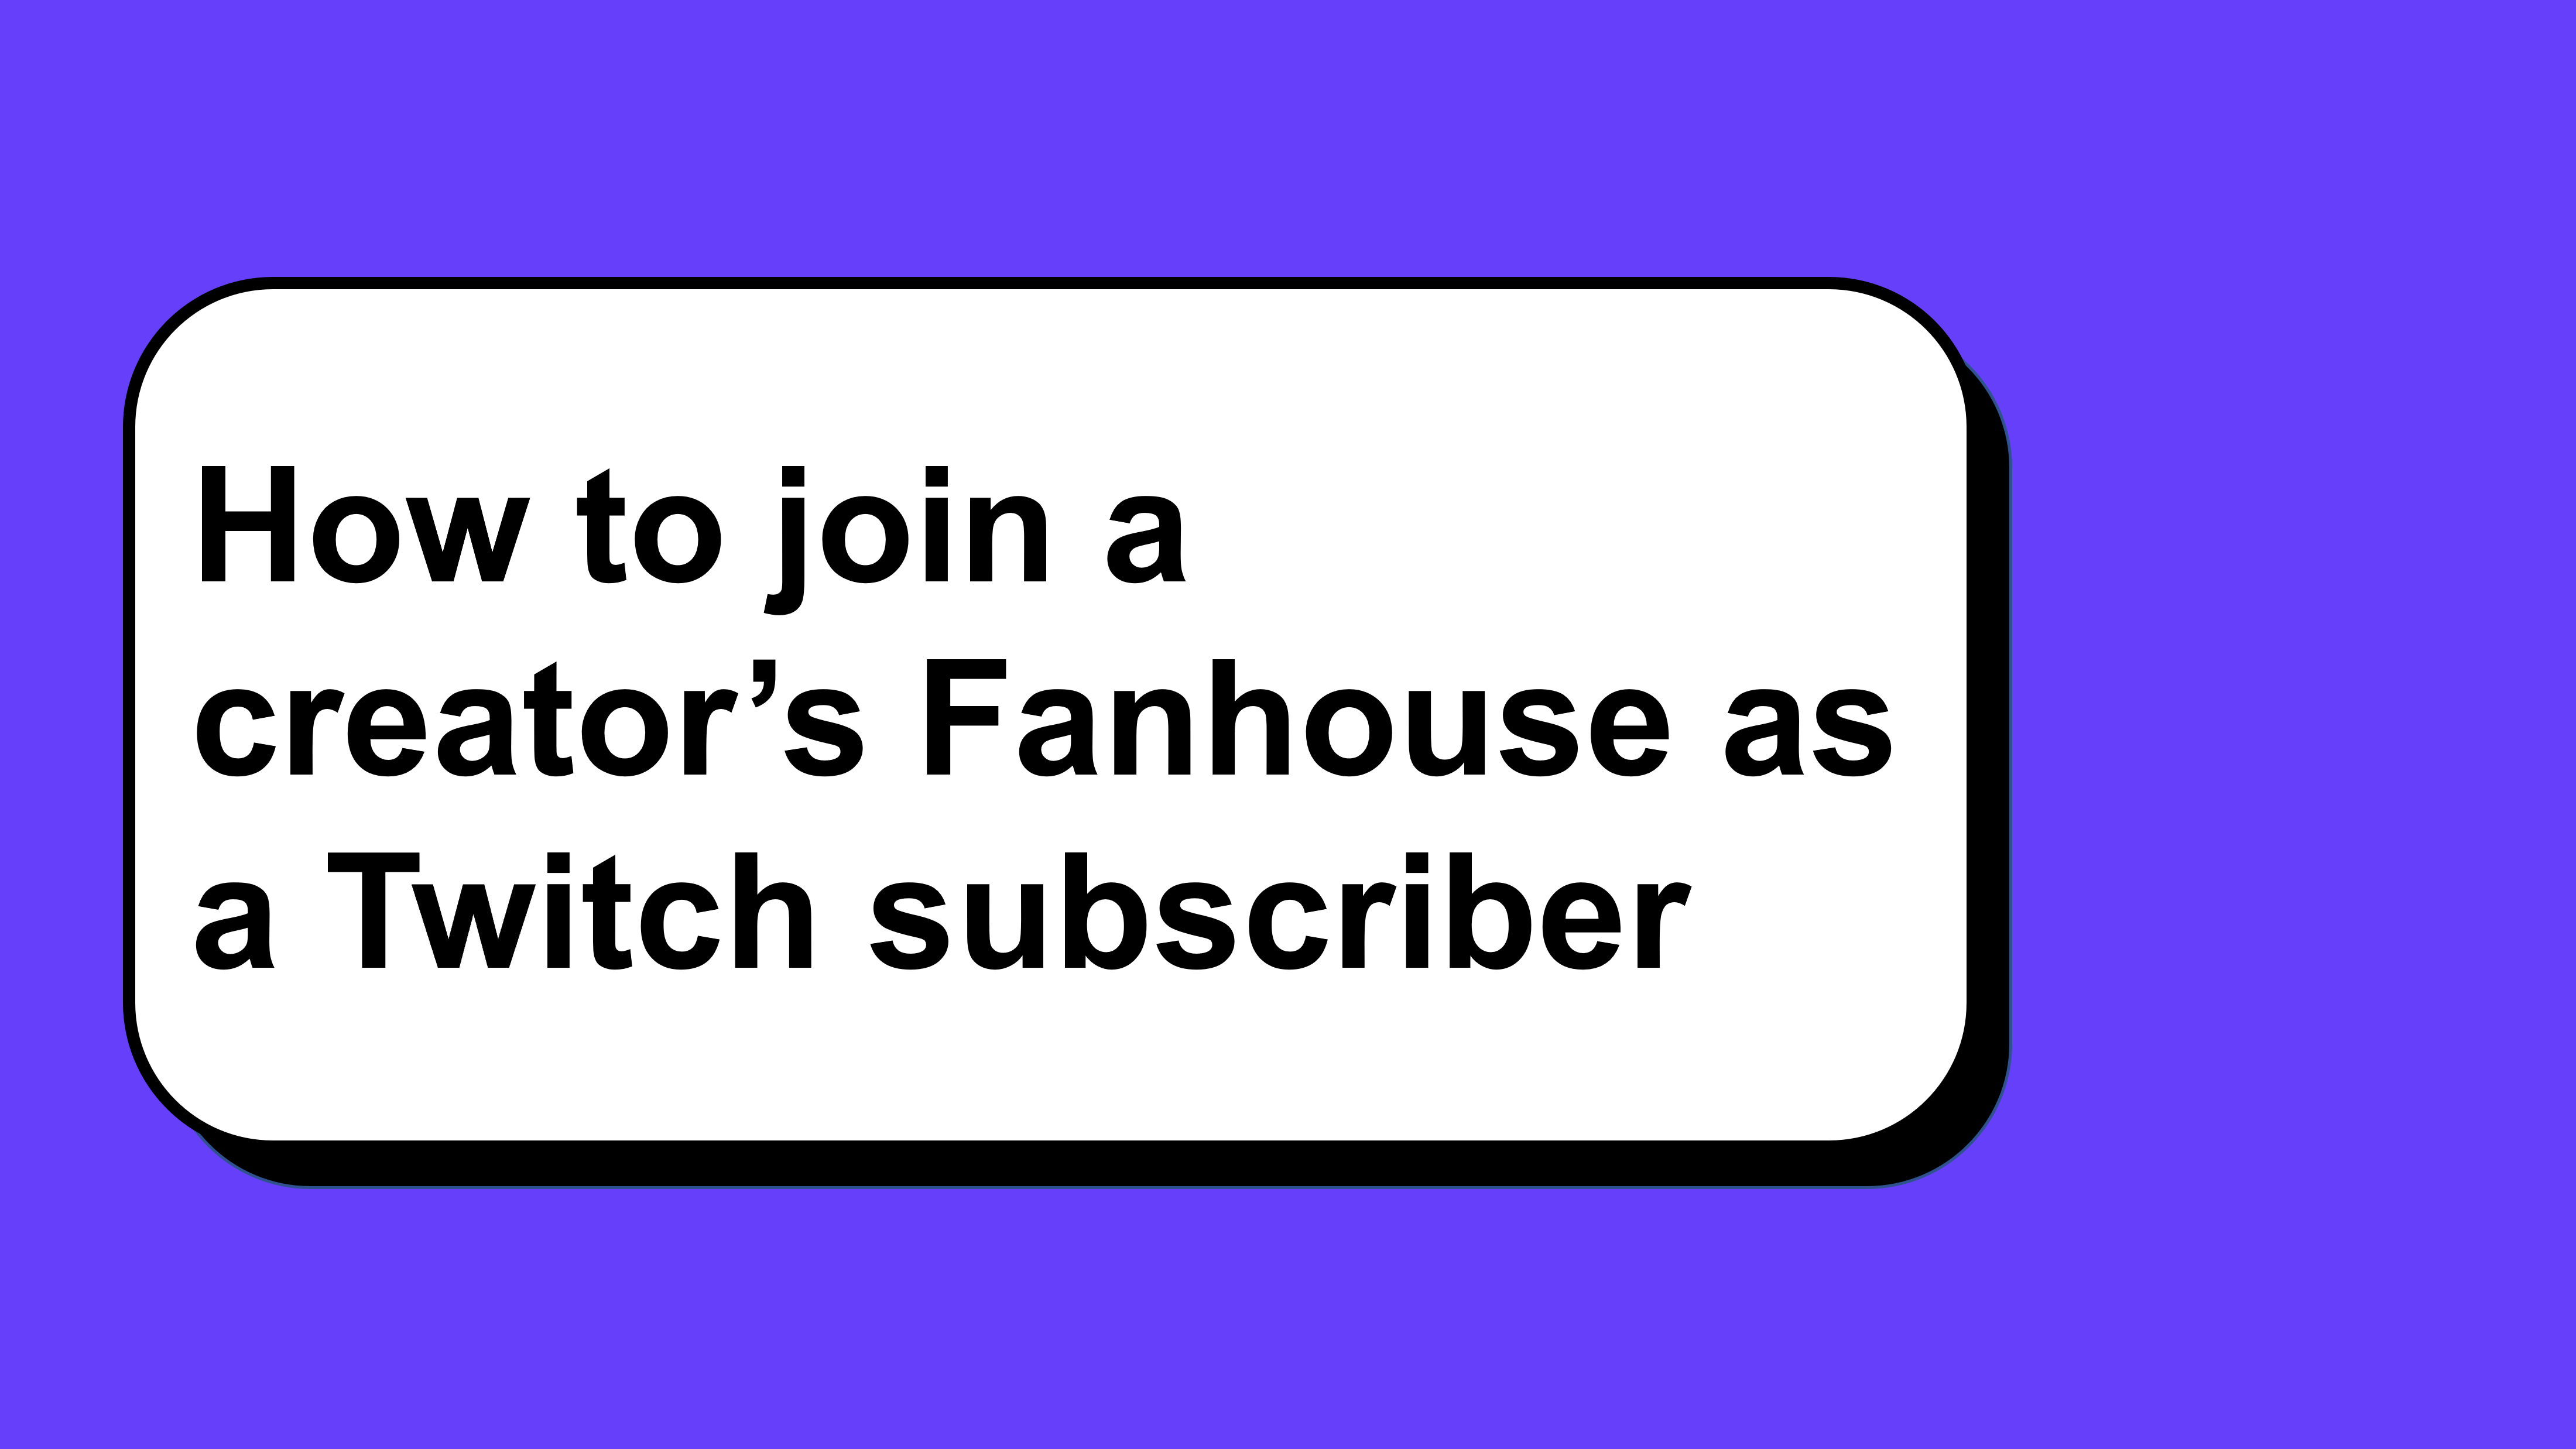 How to join a creator's Fanhouse as a Twitch subscriber